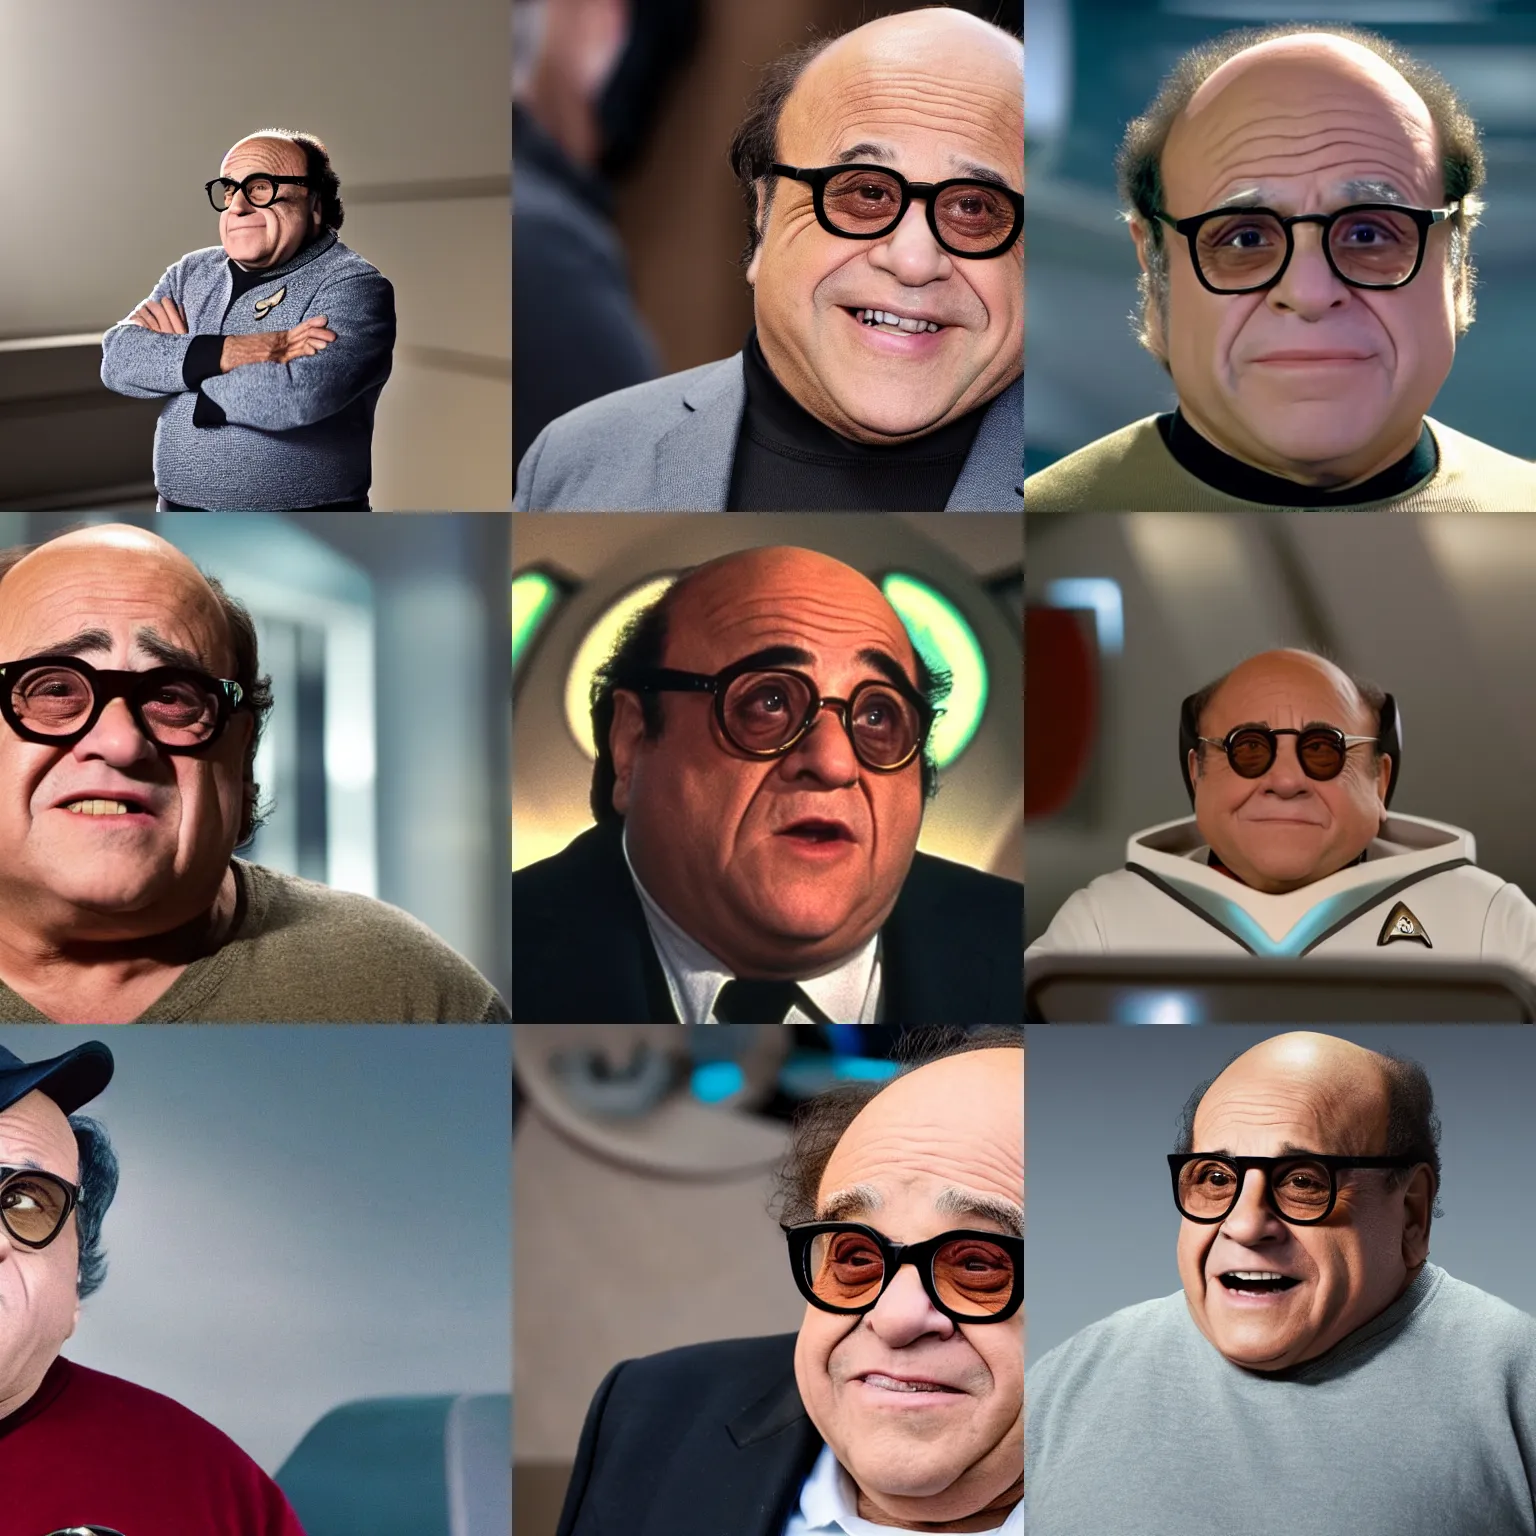 Prompt: Danny DeVito in Star Trek, XF IQ4, f/1.4, ISO 200, 1/160s, 8K, Sense of Depth, color and contrast corrected, unedited, Dolby Vision, symmetrical balance, in-frame